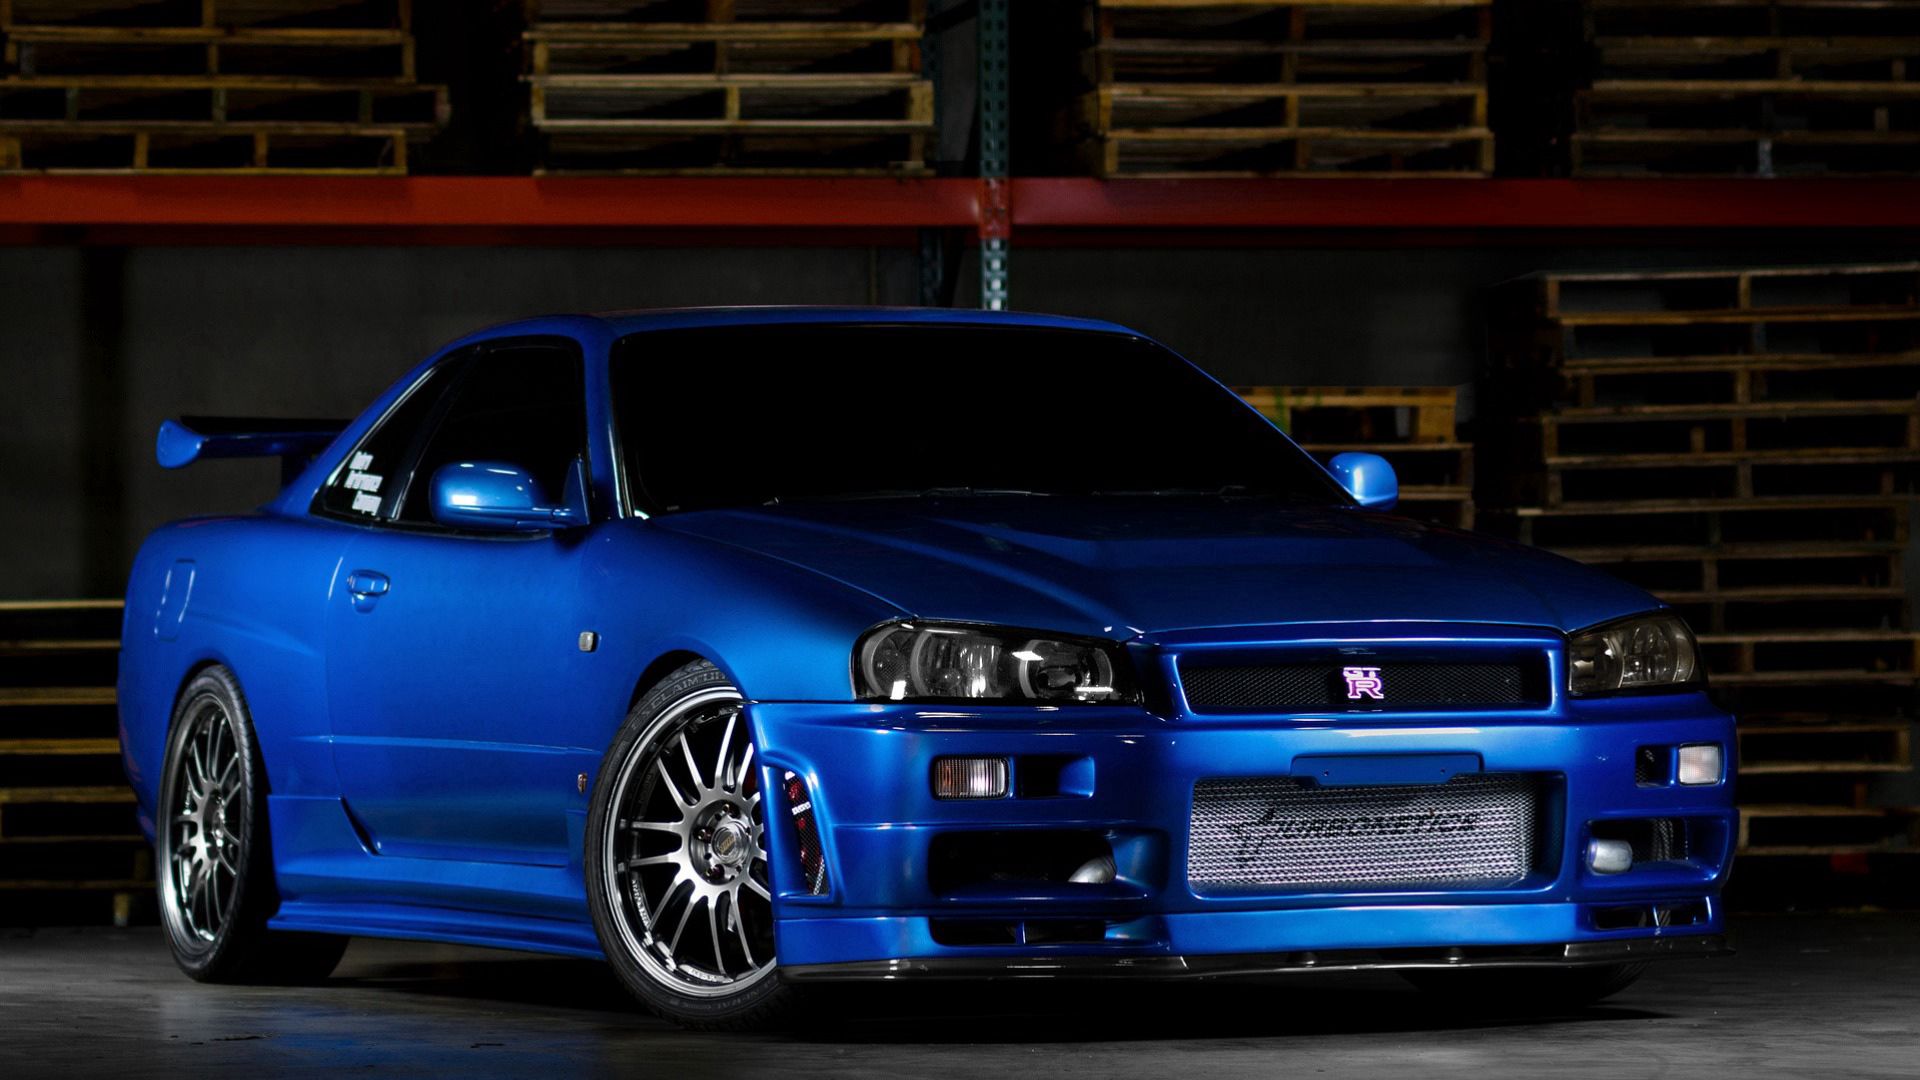 131389 download wallpaper gtr, cars, blue, front view, r34, nissan skyline screensavers and pictures for free